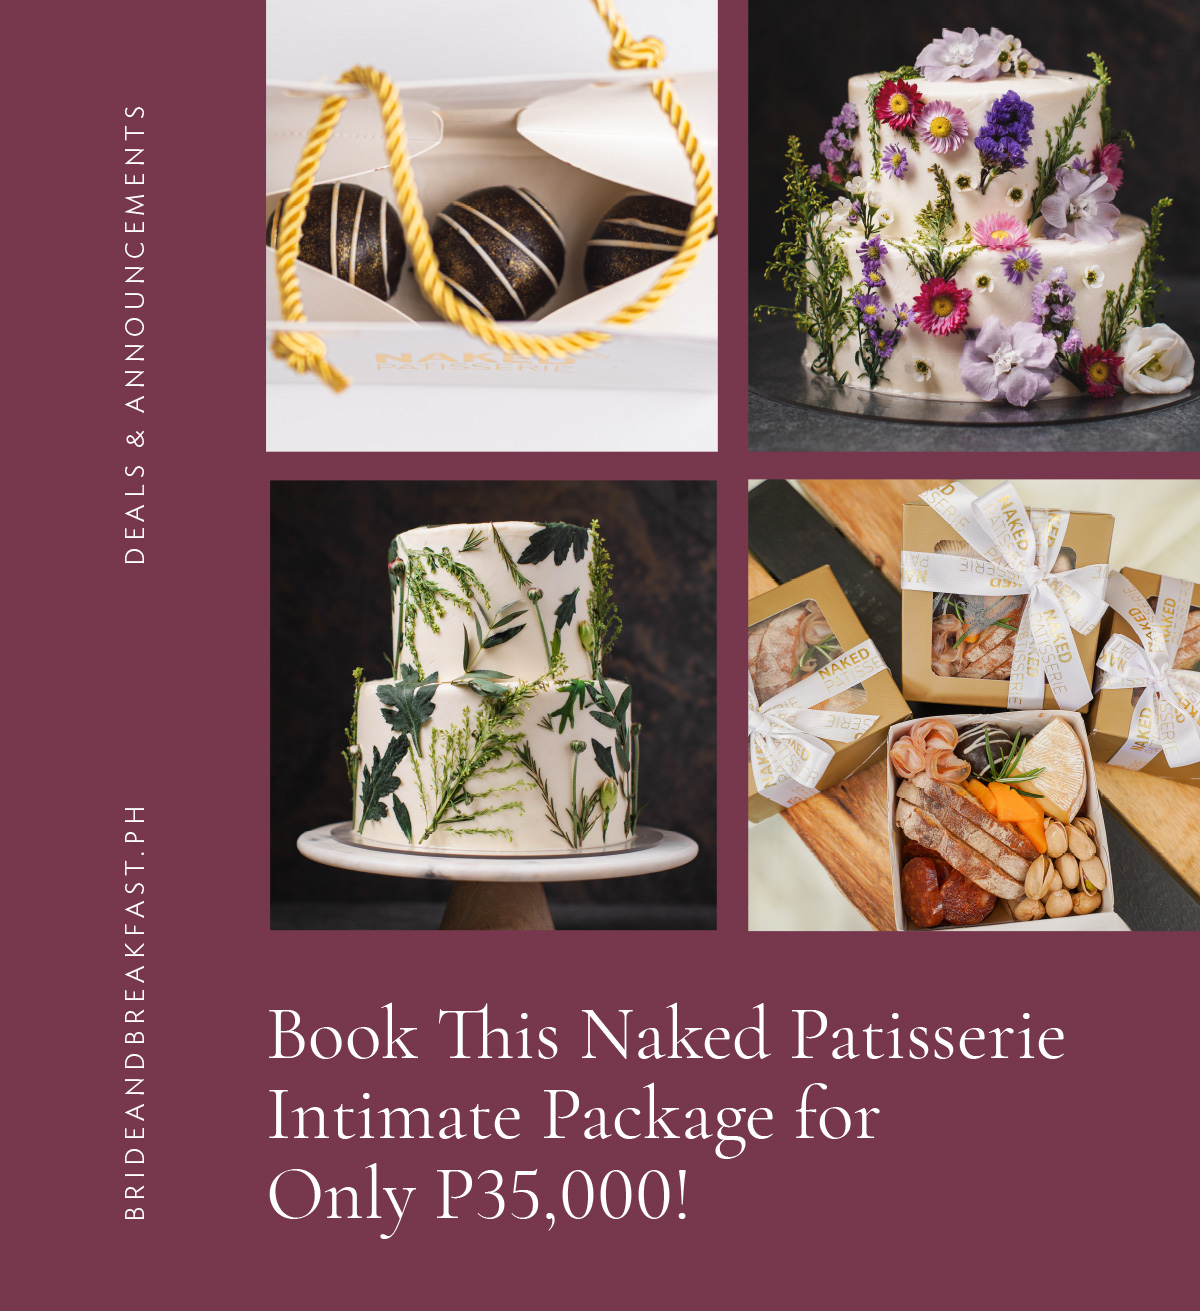 Book This Intimate Package of Naked Patisserie for Only P35,000!